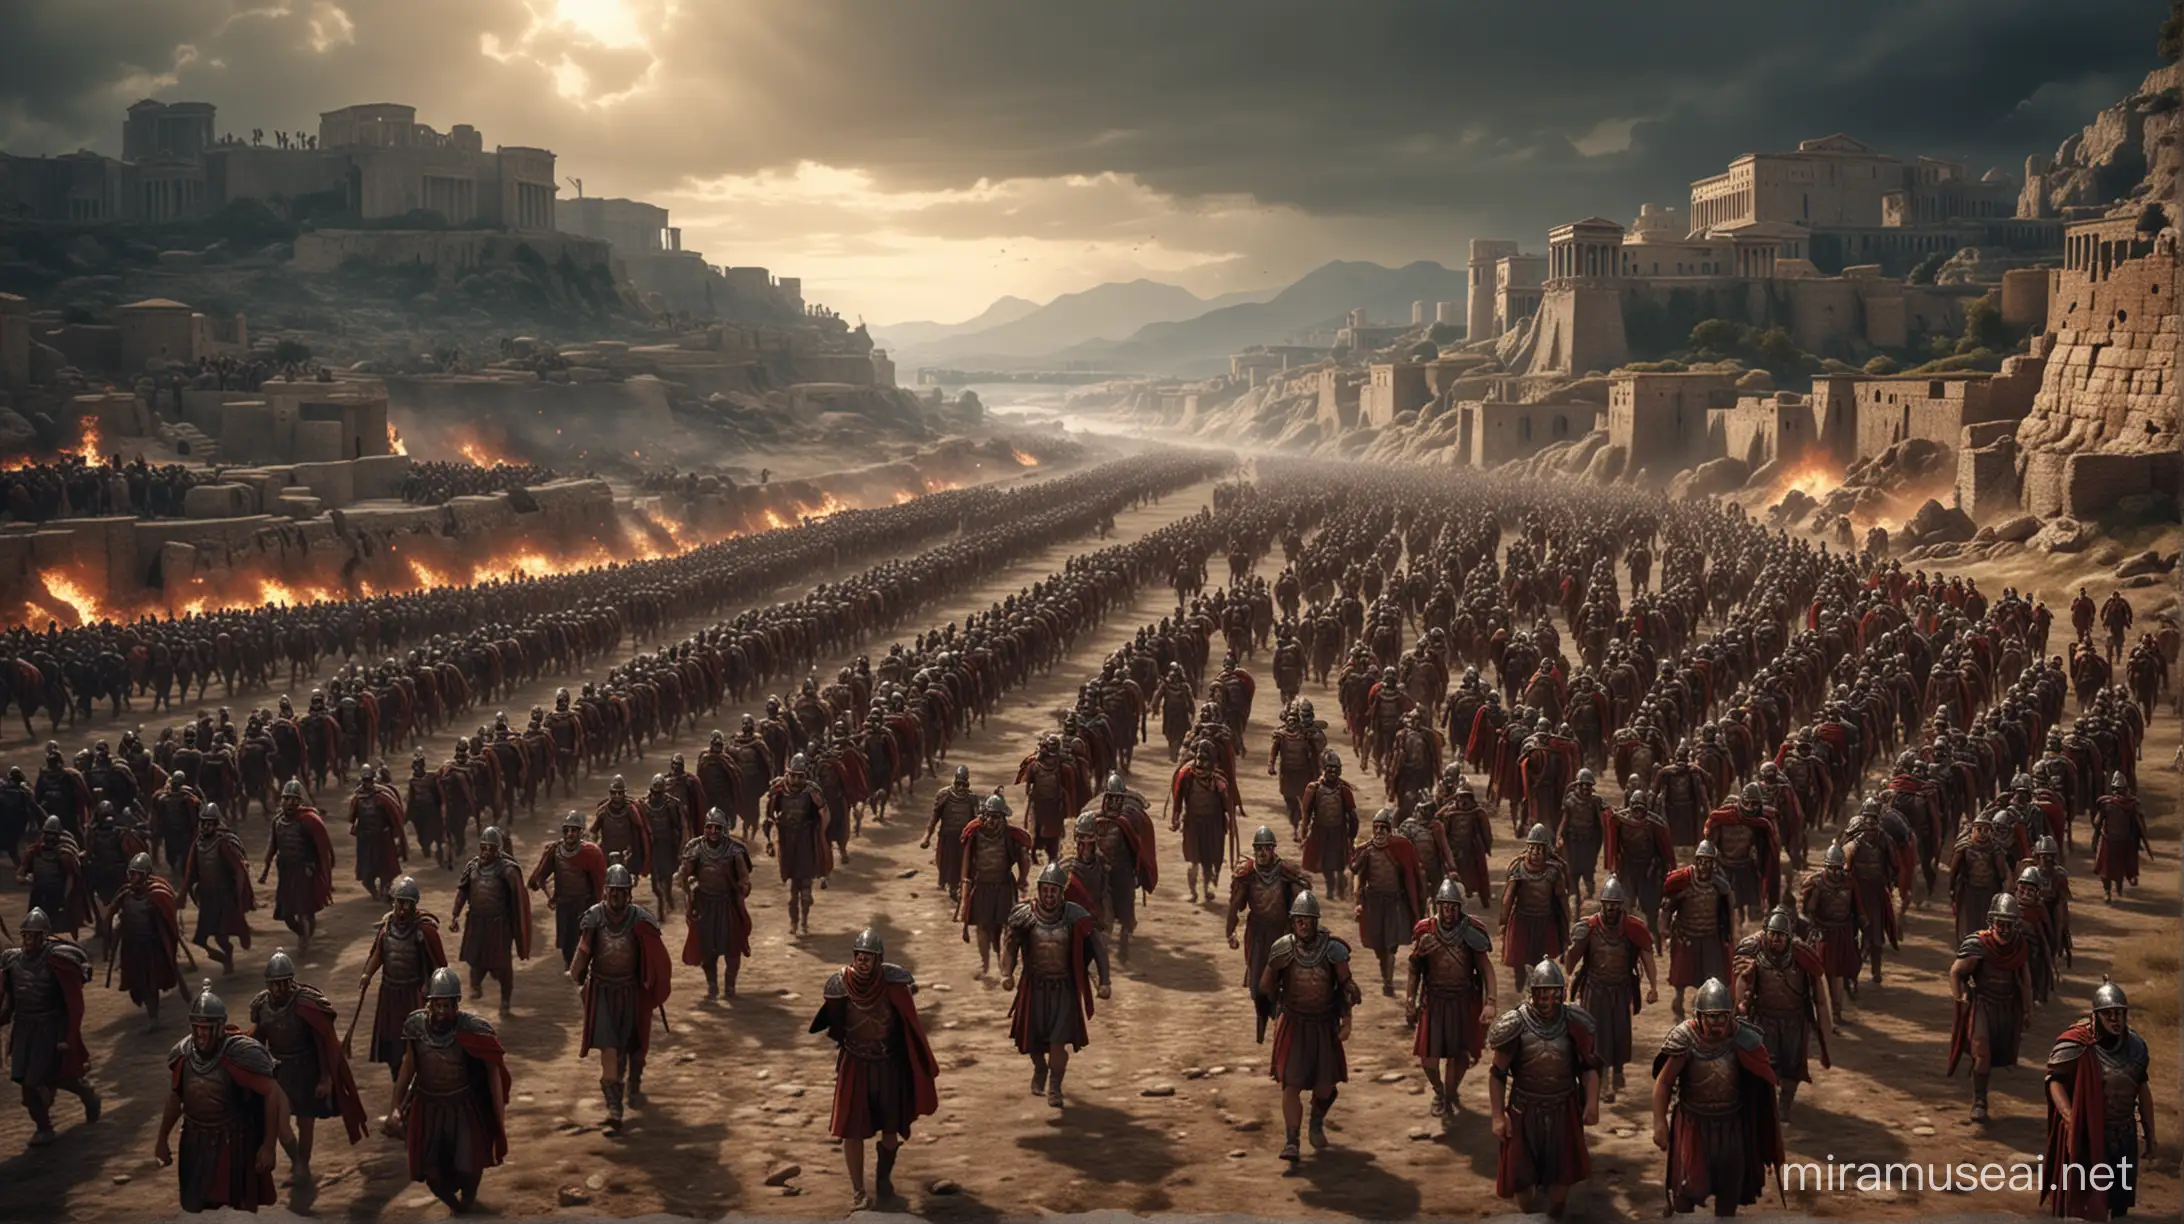 Ancient Roman Empire landscape, thousands of legionaries run to the battle against revolutionaries, tense atmosphere, dramatic lighting, ultra realistic